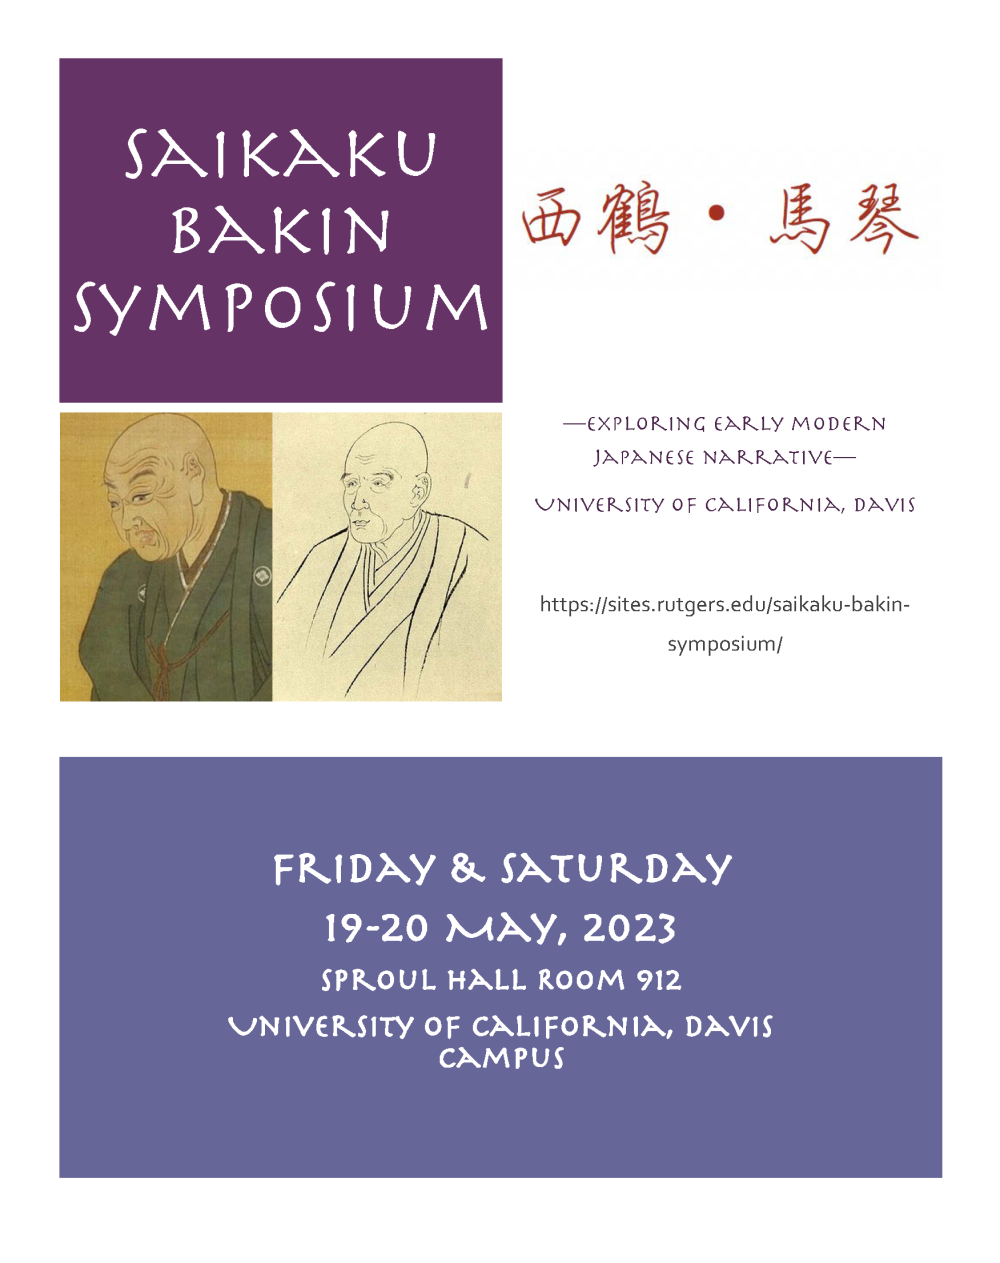 Flyer for the symposium featuring silk screen art